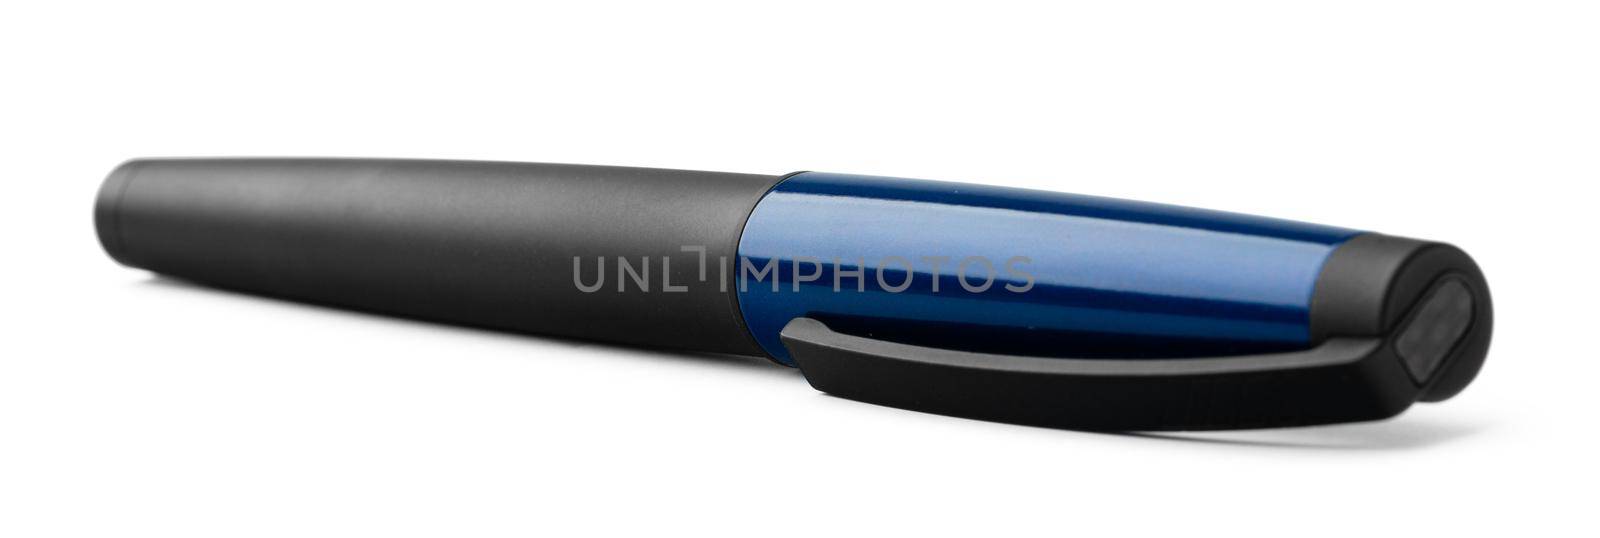 pen isolated on a white background, close up by Fabrikasimf